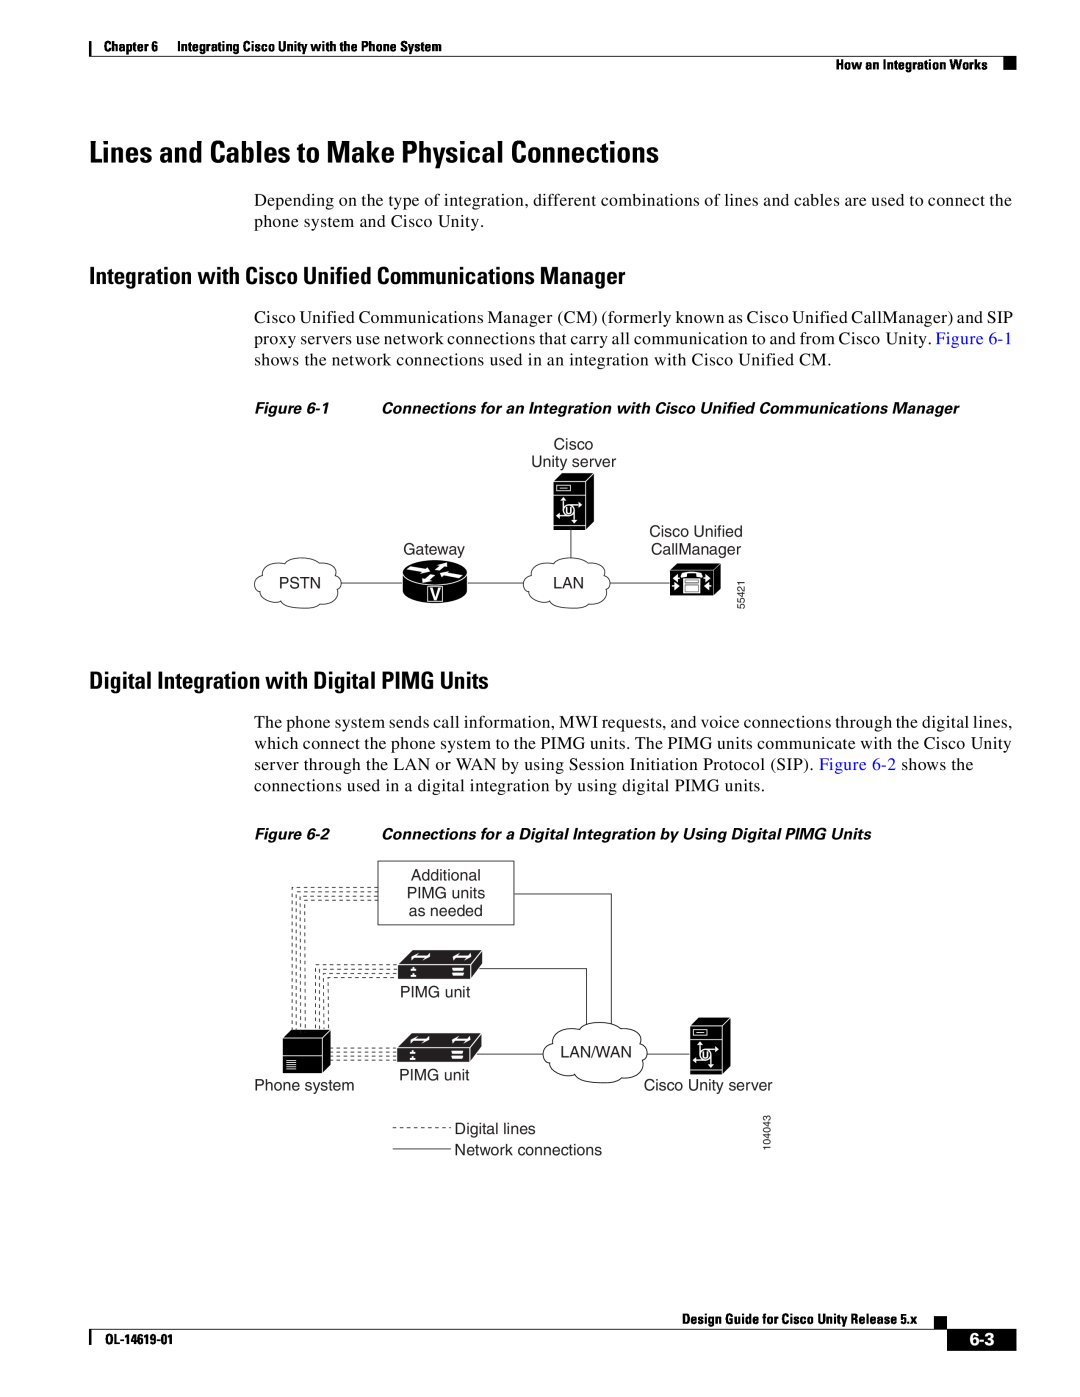 Cisco Systems OL-14619-01 manual Lines and Cables to Make Physical Connections, Digital Integration with Digital PIMG Units 